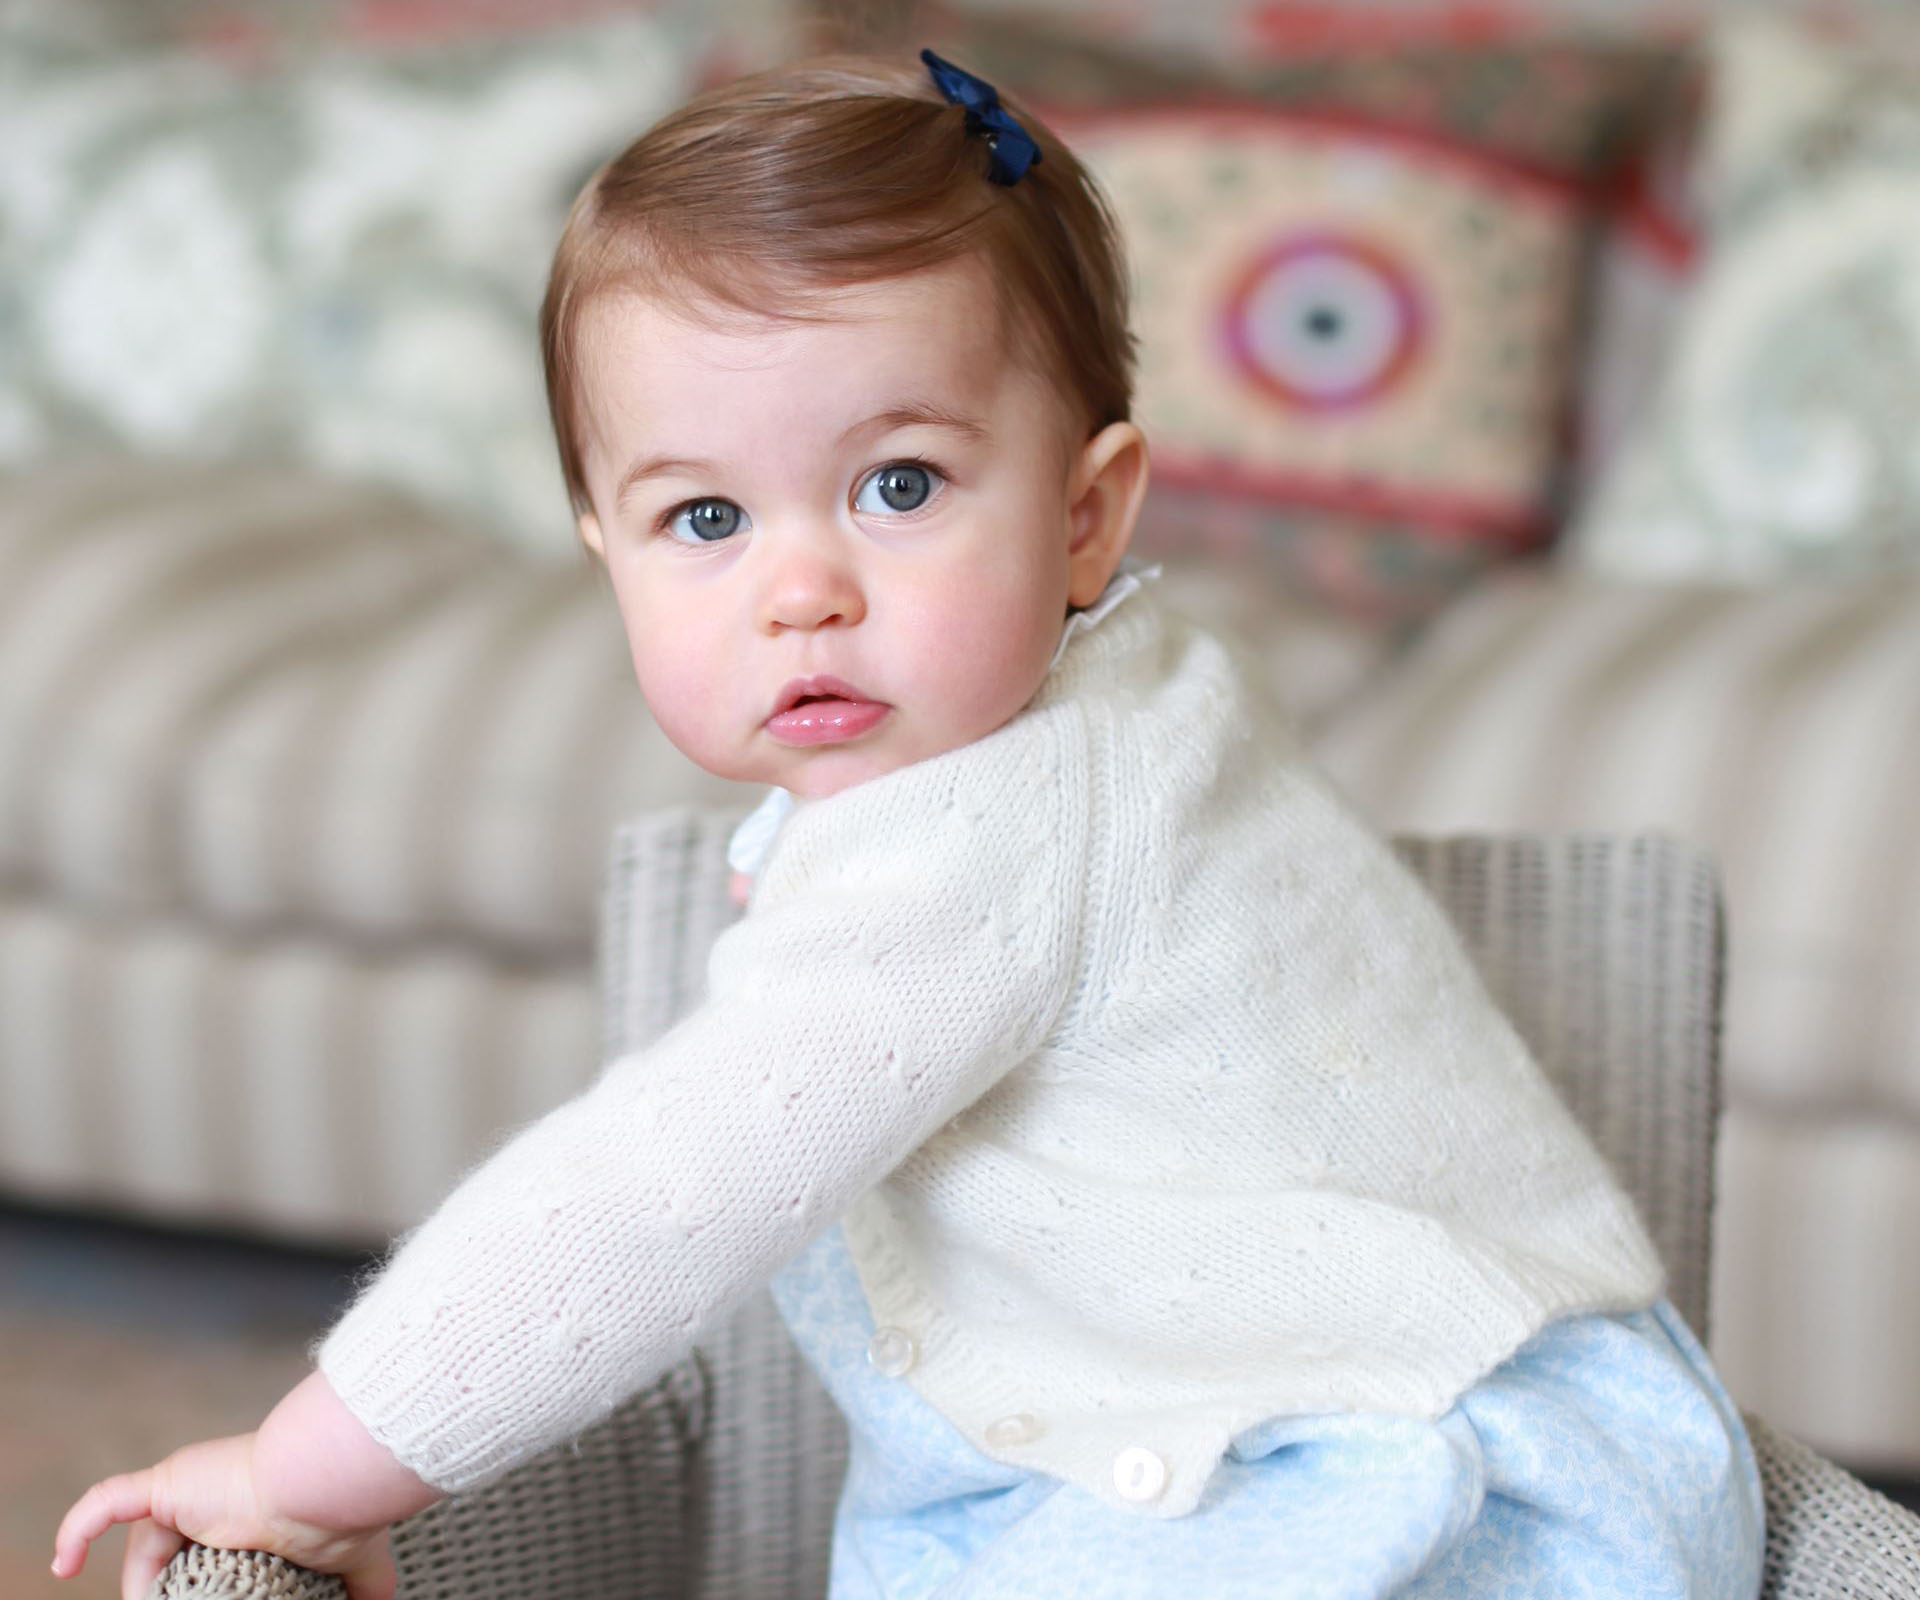 Princess Charlotte’s first thank you card revealed